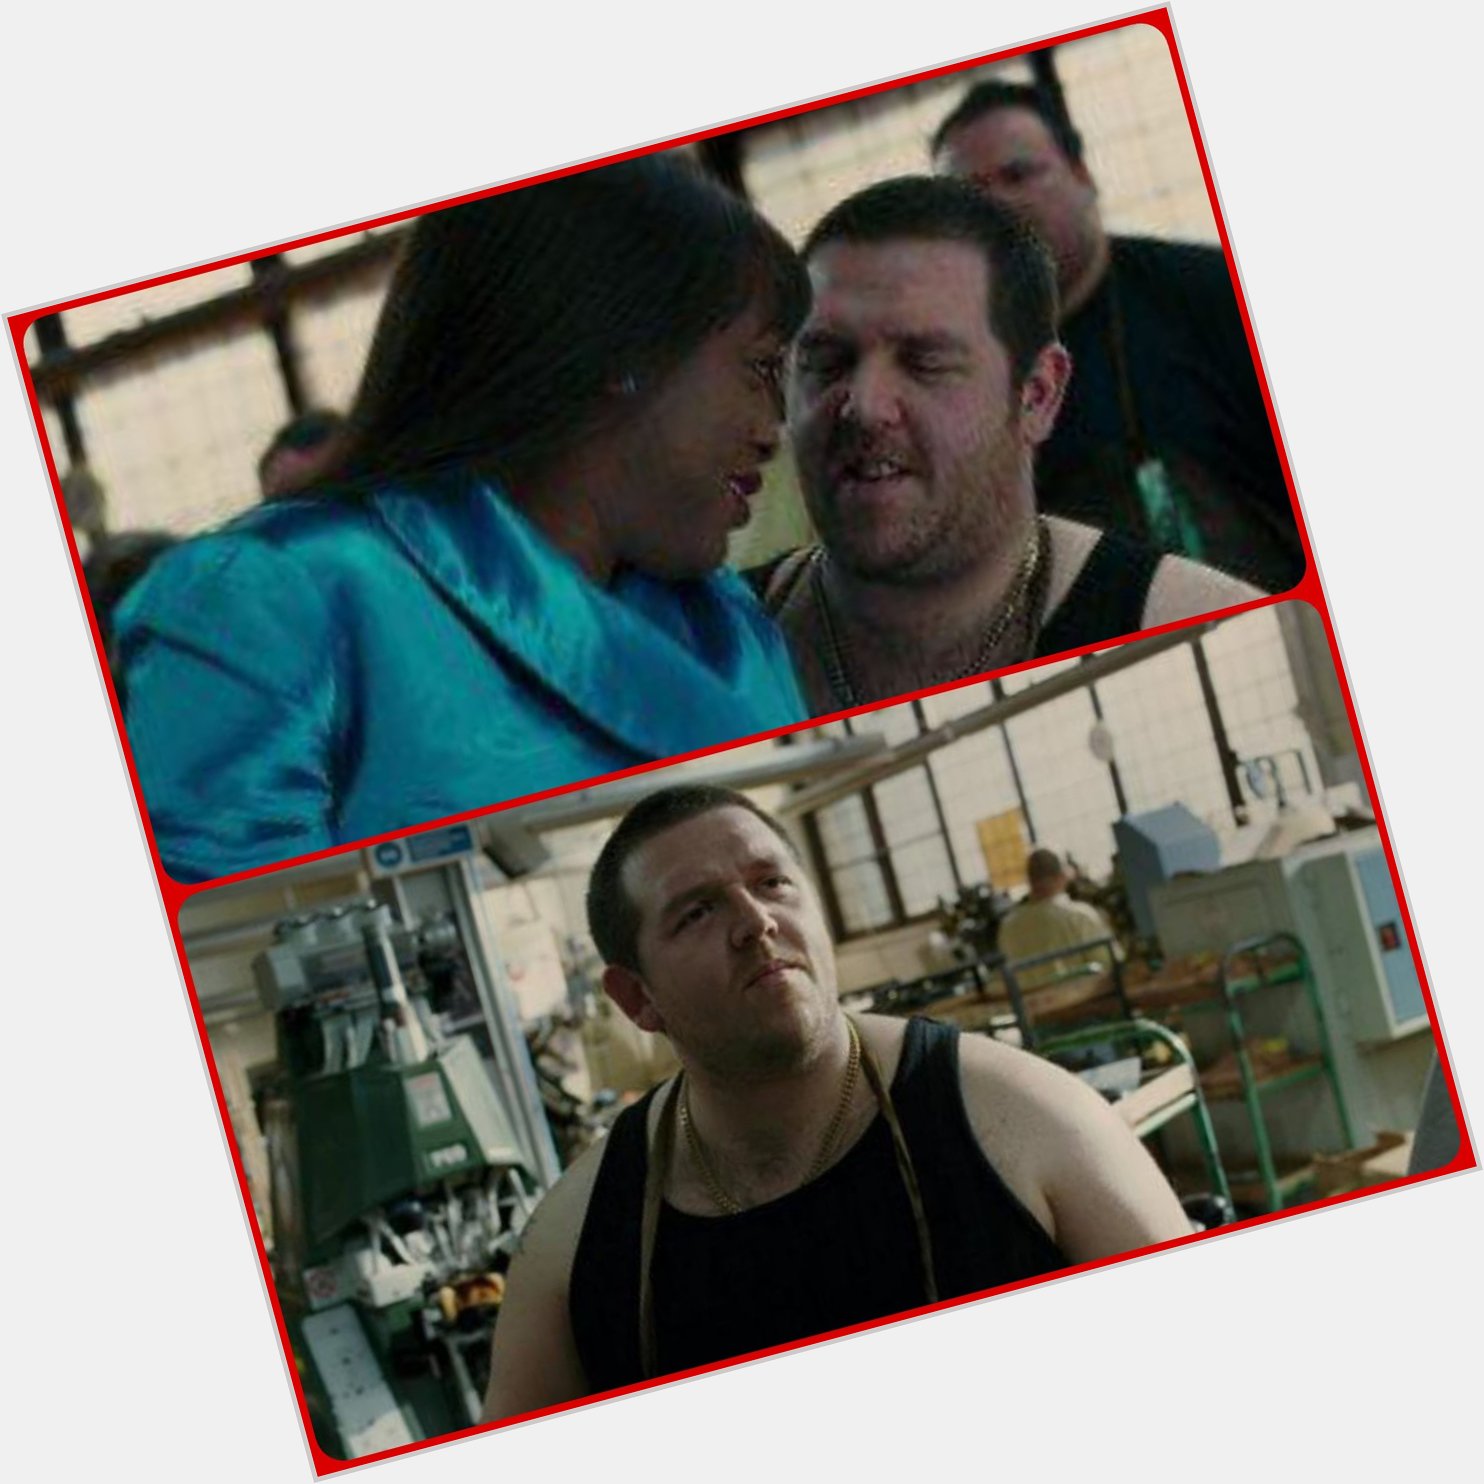 Happy birthday to Nick Frost, who played Don in the original Kinky Boots film. 